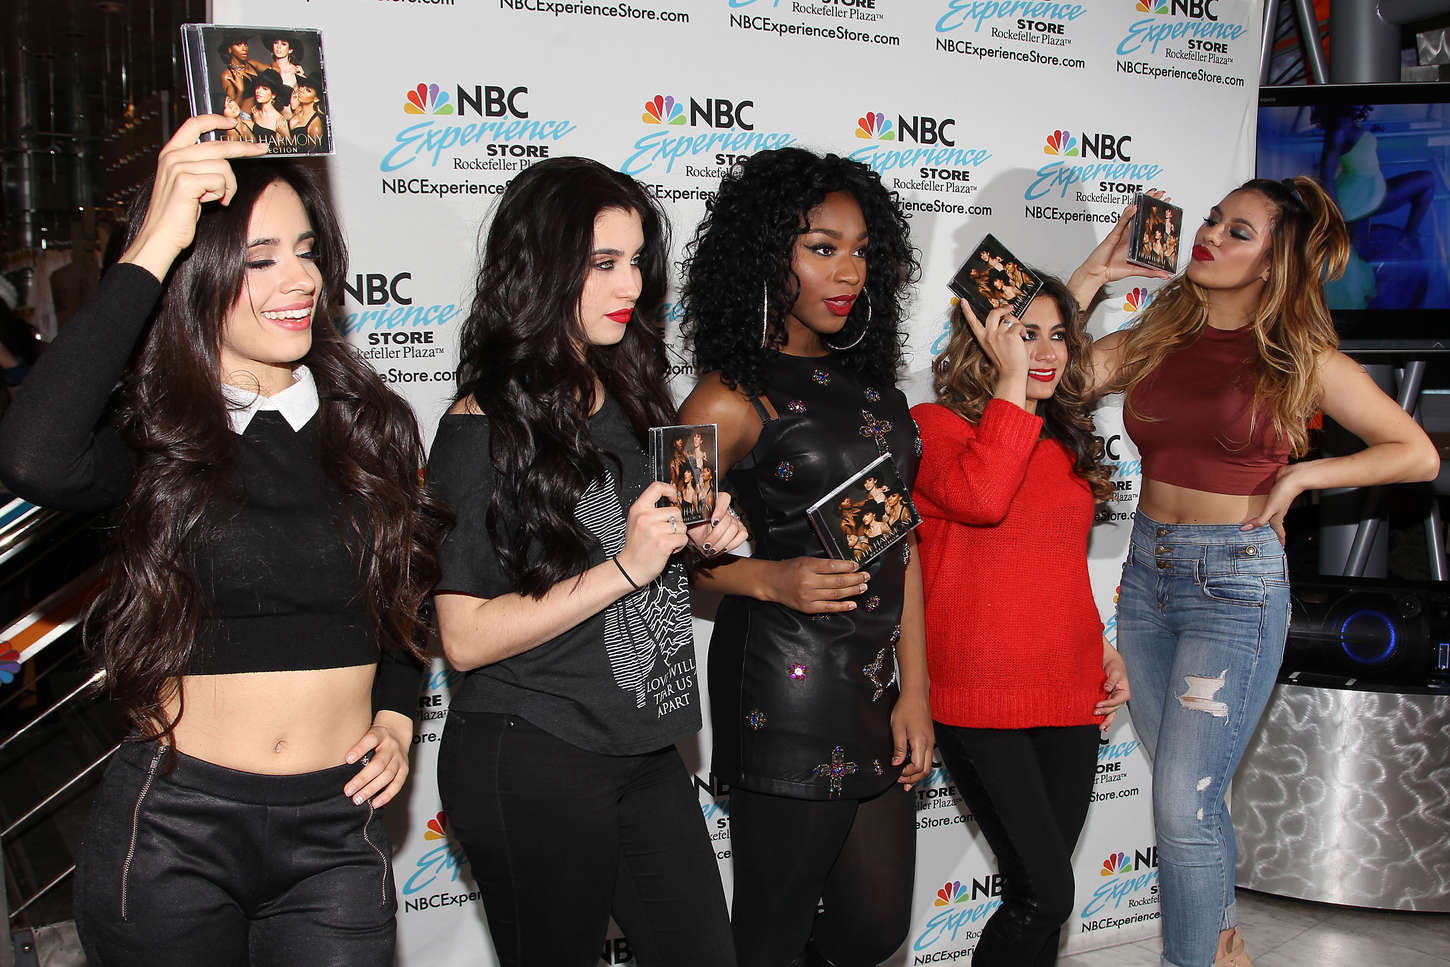 Fifth Harmony at the NBC Experience Store to promote and sign their new CD